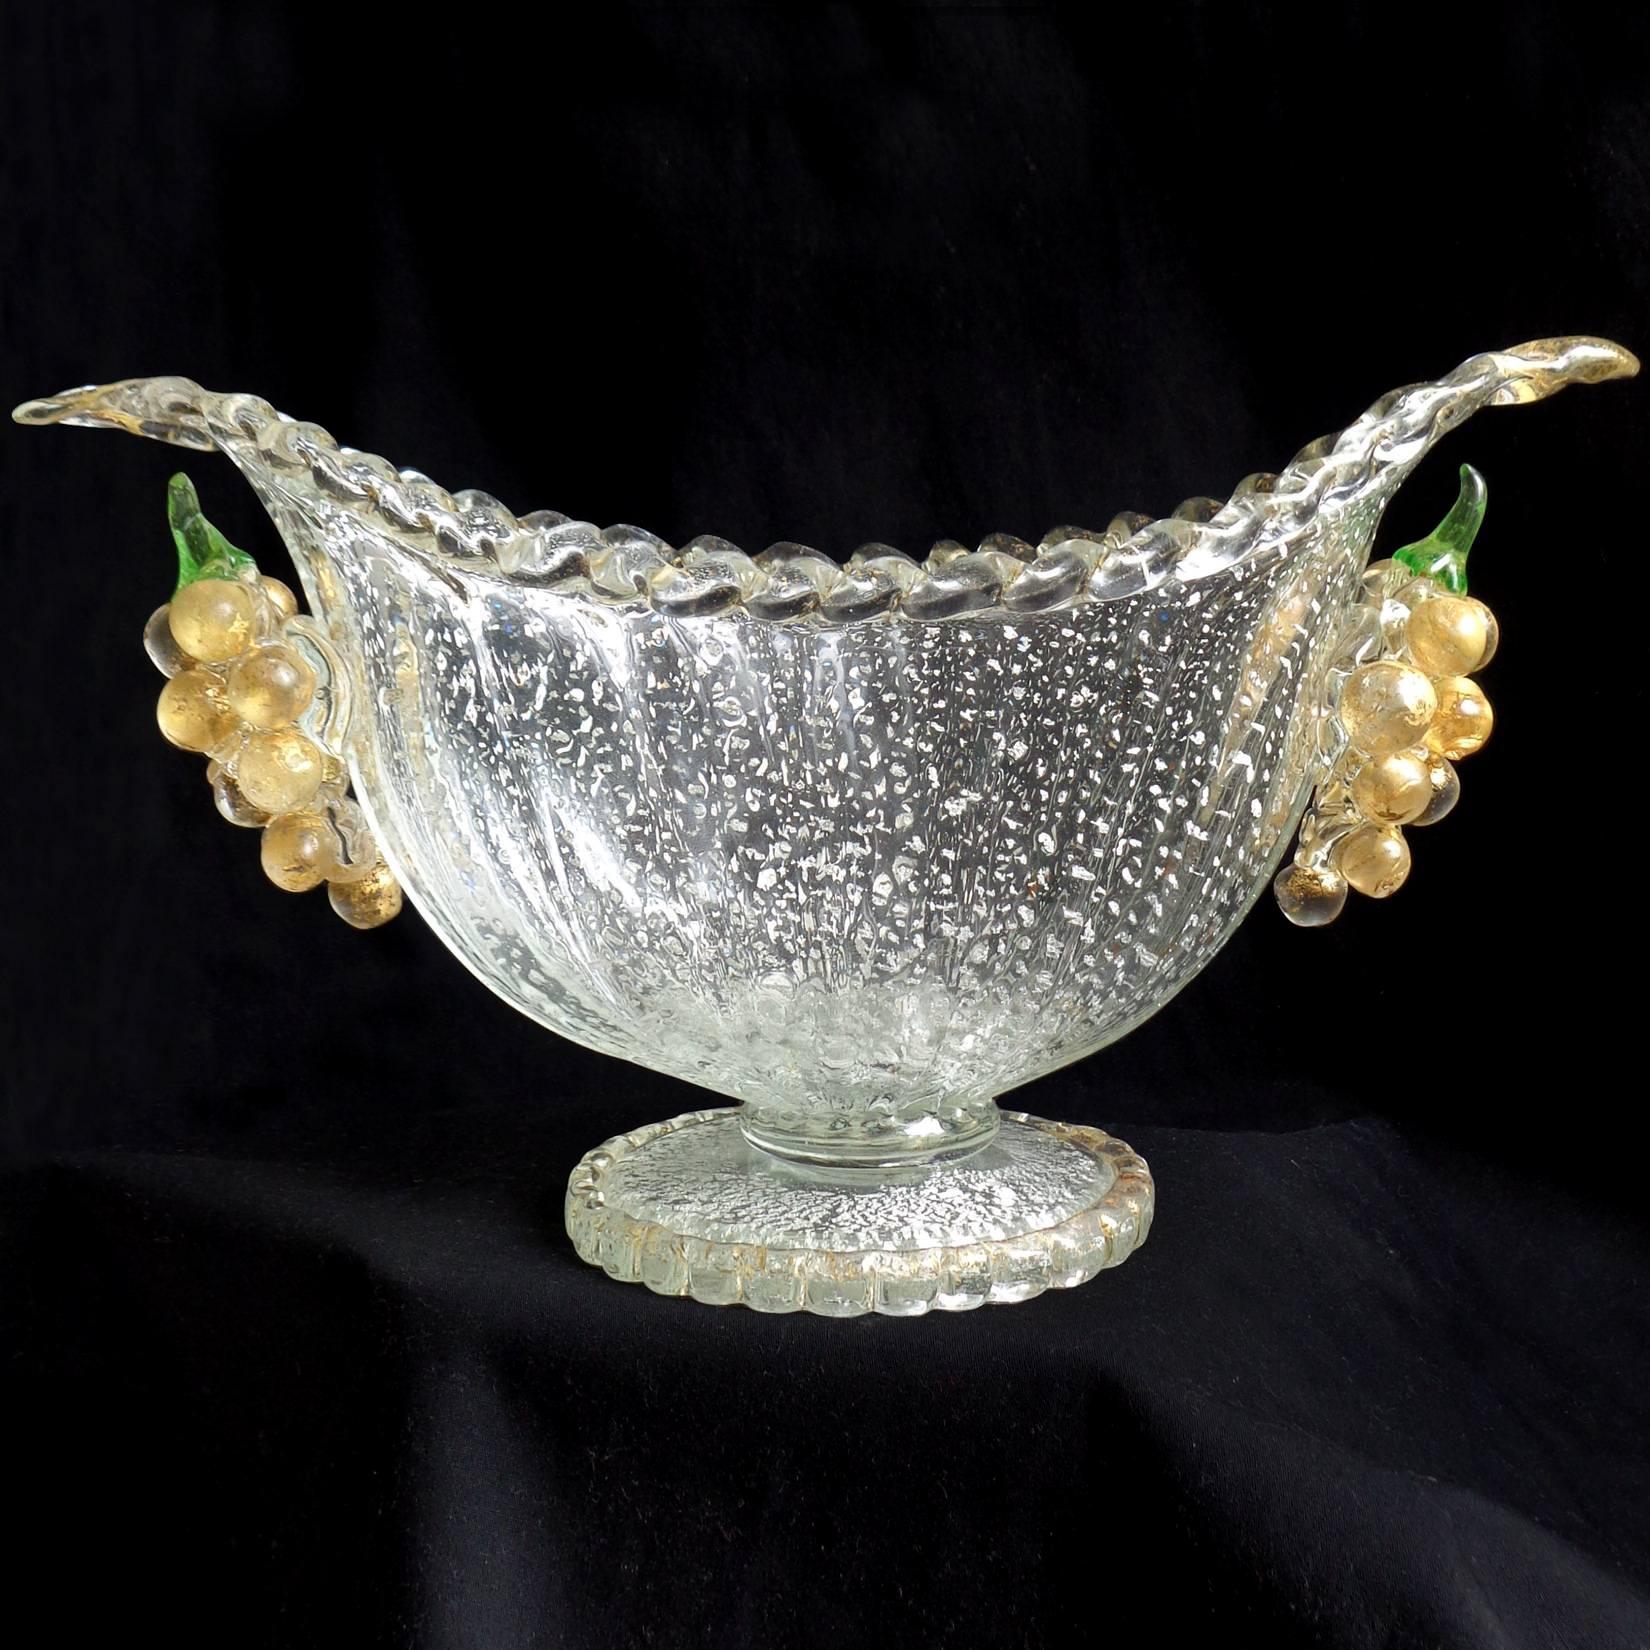 Gorgeous vintage Murano hand blown, silver and gold flecks with grape decoration Italian art glass compote bowl / vase. Documented to the Barovier e Toso company, circa 1930s-1940s. Profusely covered in silver leaf, and gold leaf on the rim and